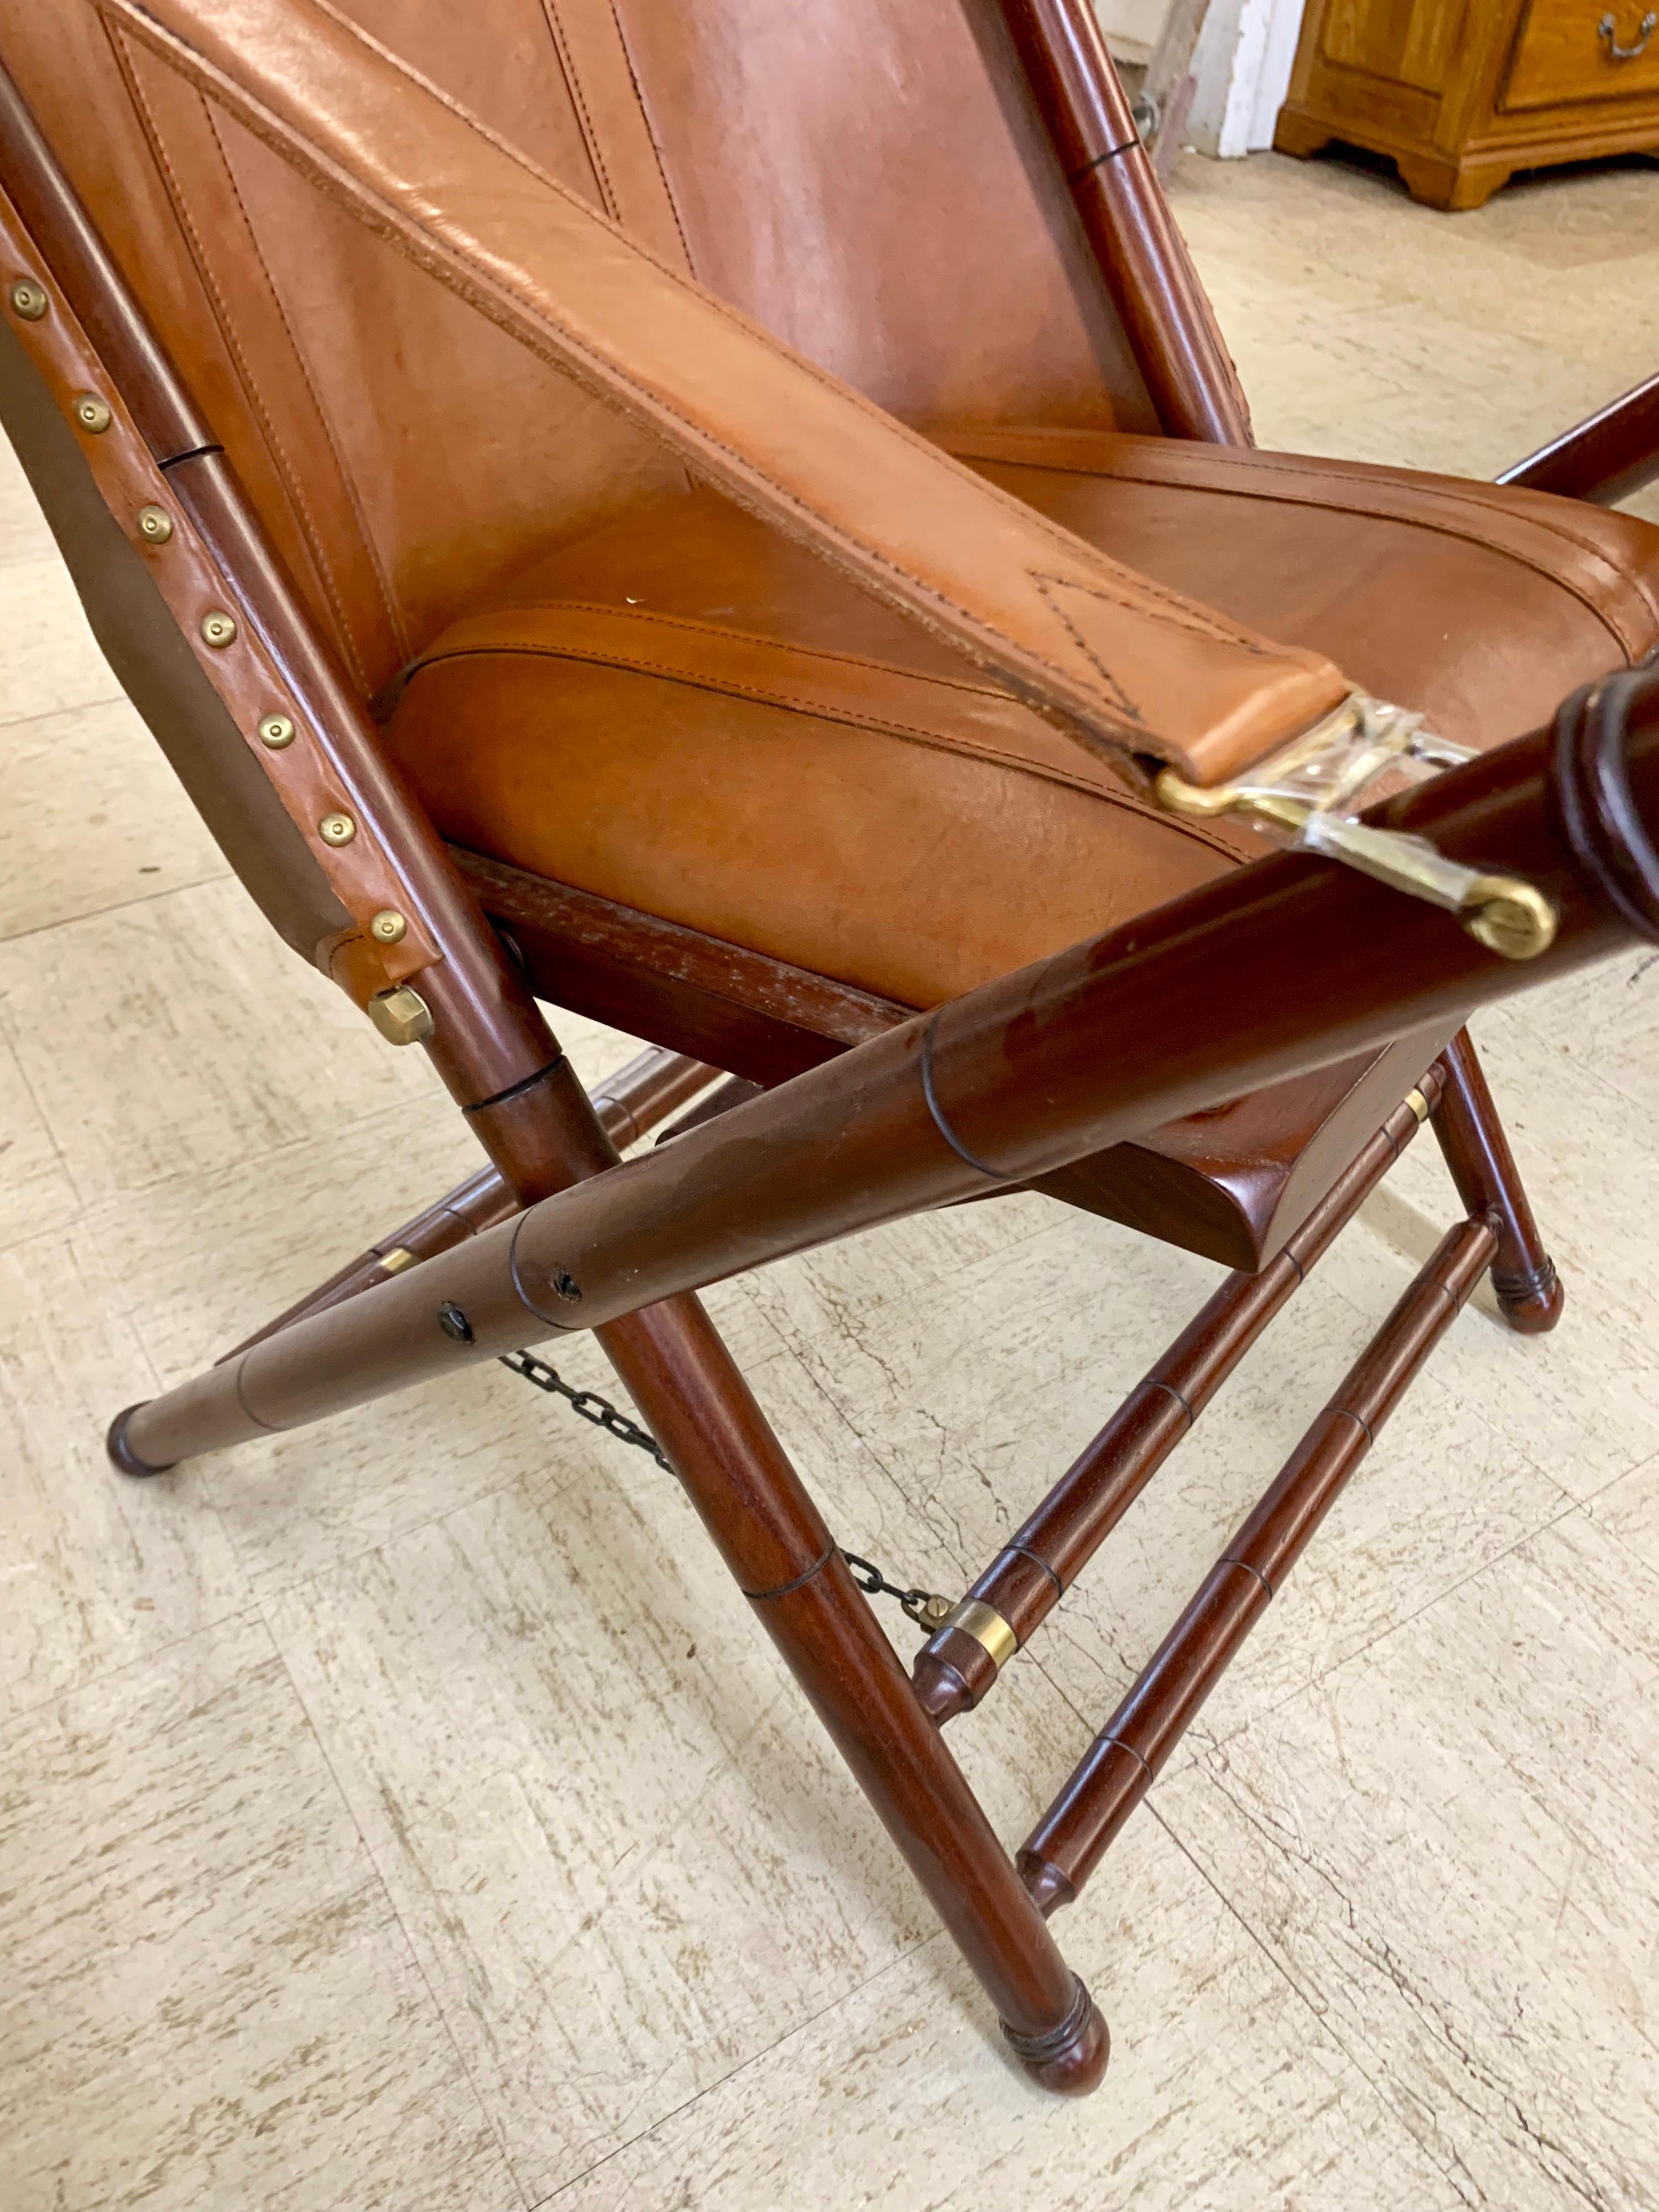 Rare Palecek brown leather campaign folding chair with matching ottomans/stool. Stool measures 22 inches wide x 21 inches deep x 16 inches high.